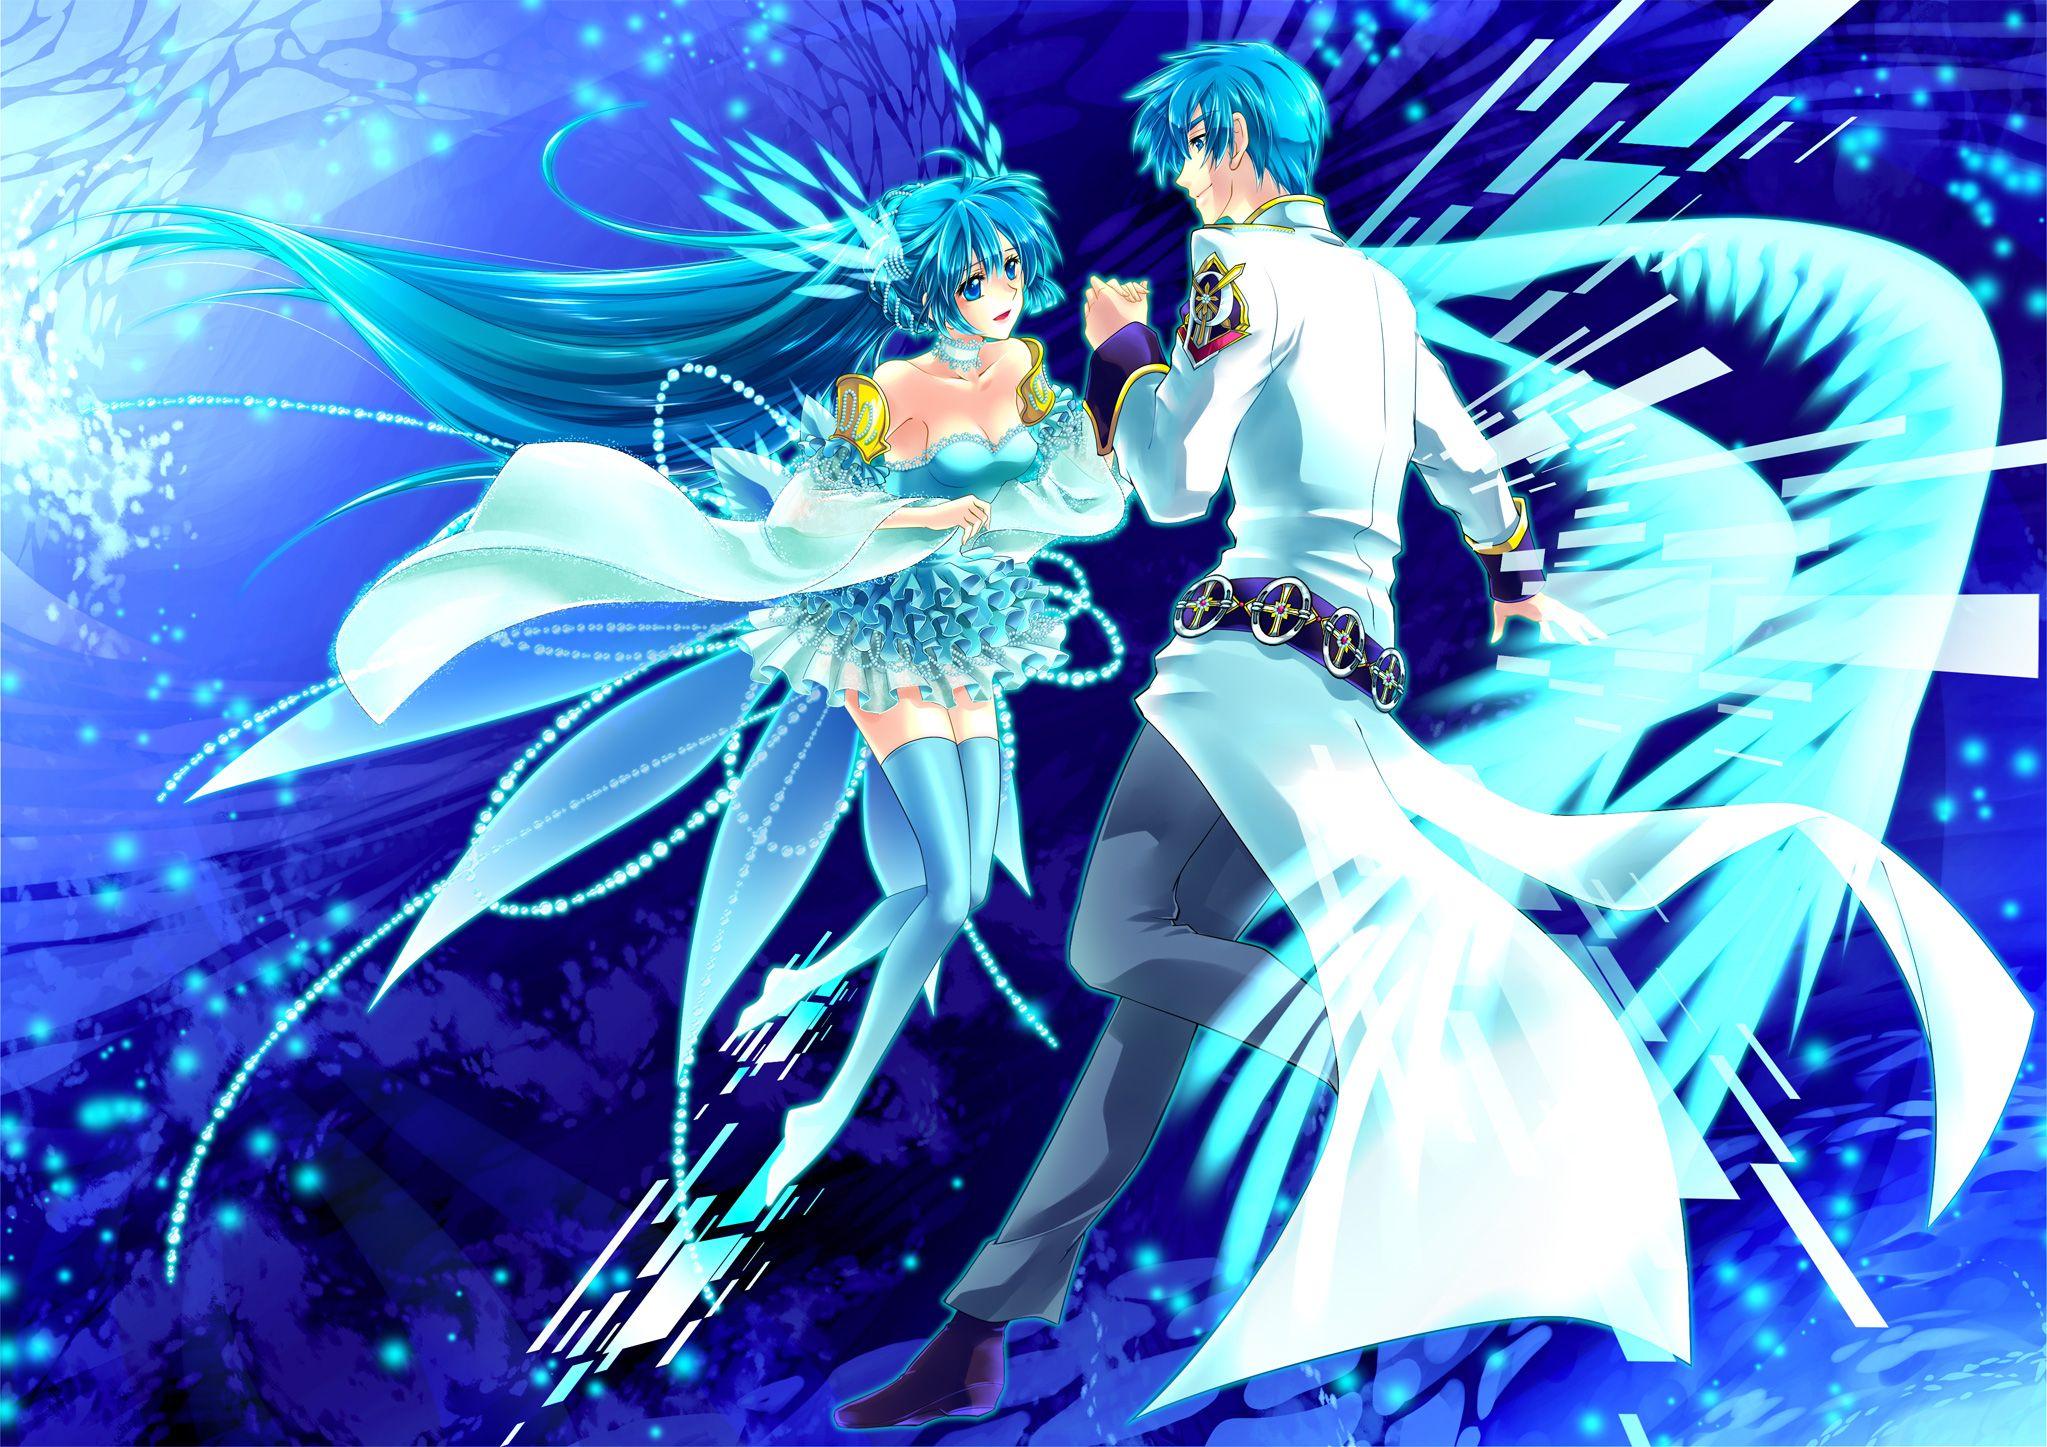 anime picture. Dancing Anime Blue HD Wallpaper Dancing Anime